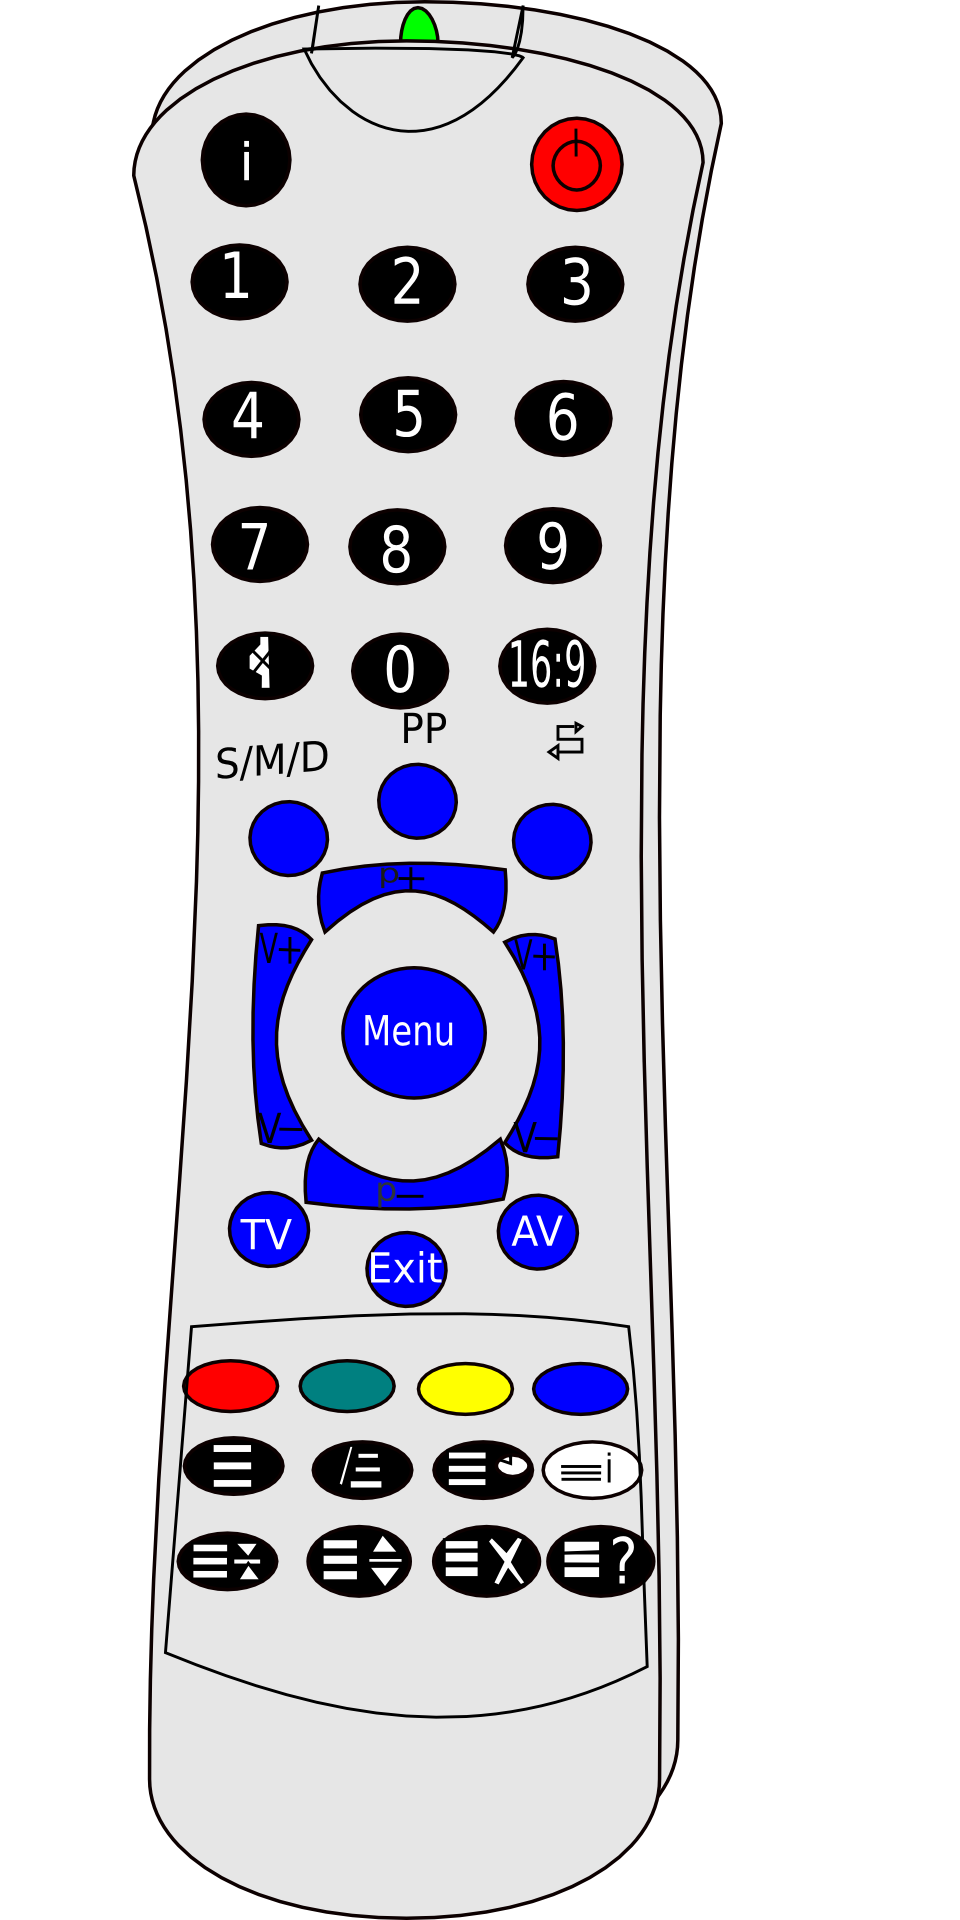 Remote control drawing free image download